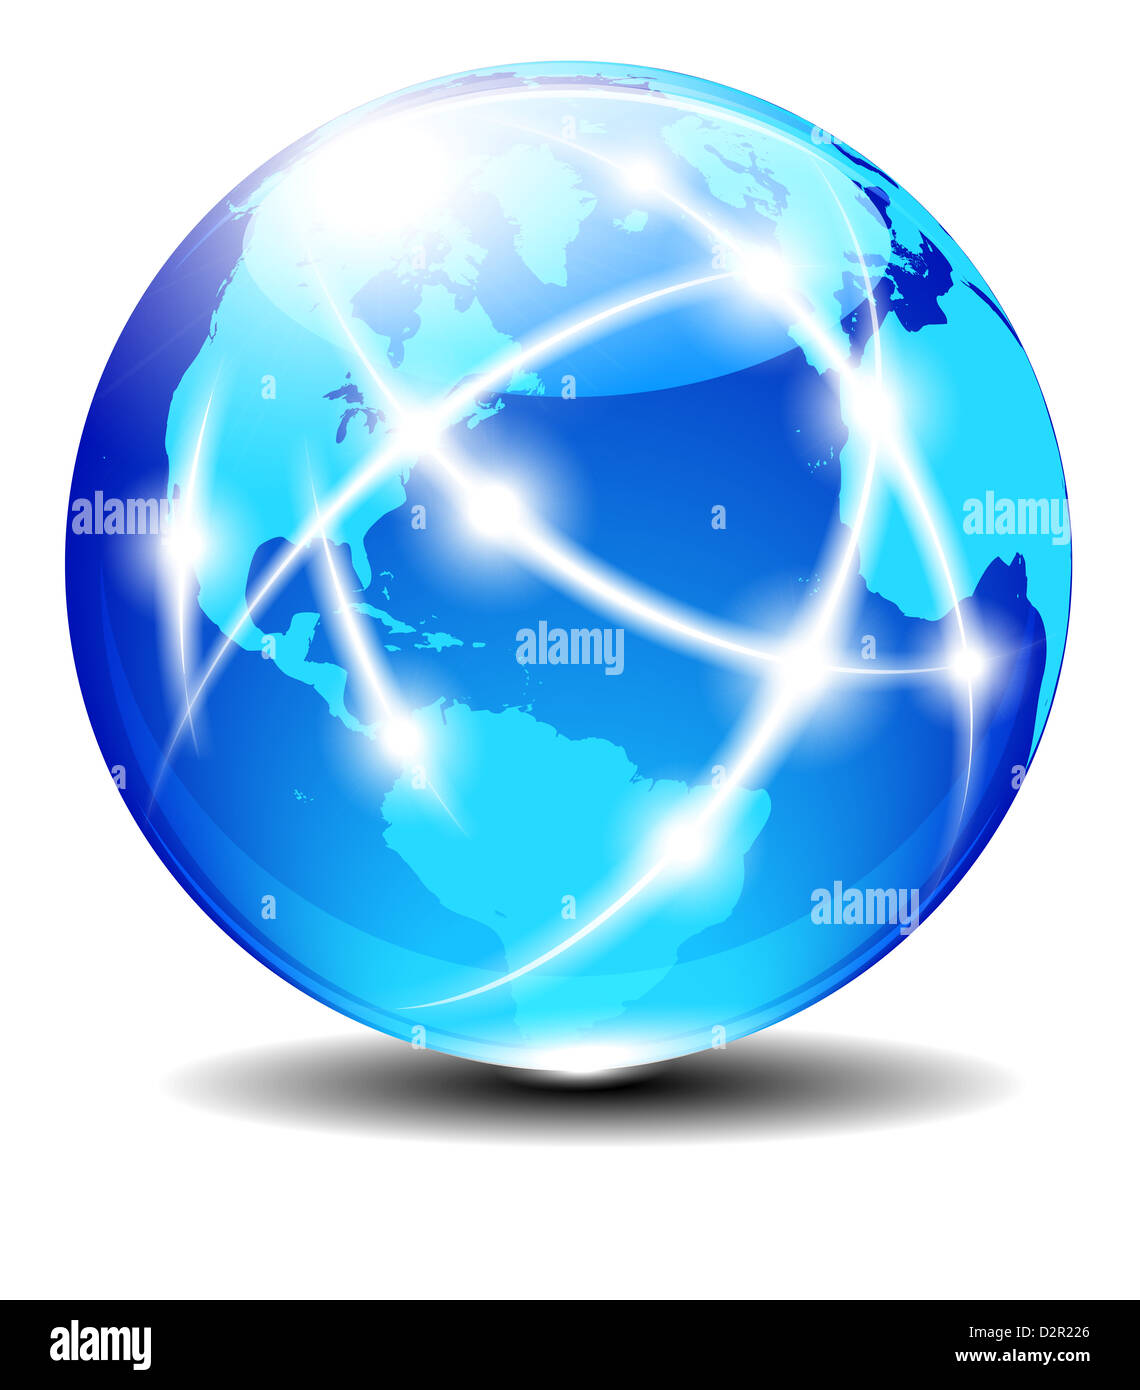 North, South America, Europe, Africa Global Communication Planet - Communication across the world with light lines connected Stock Photo